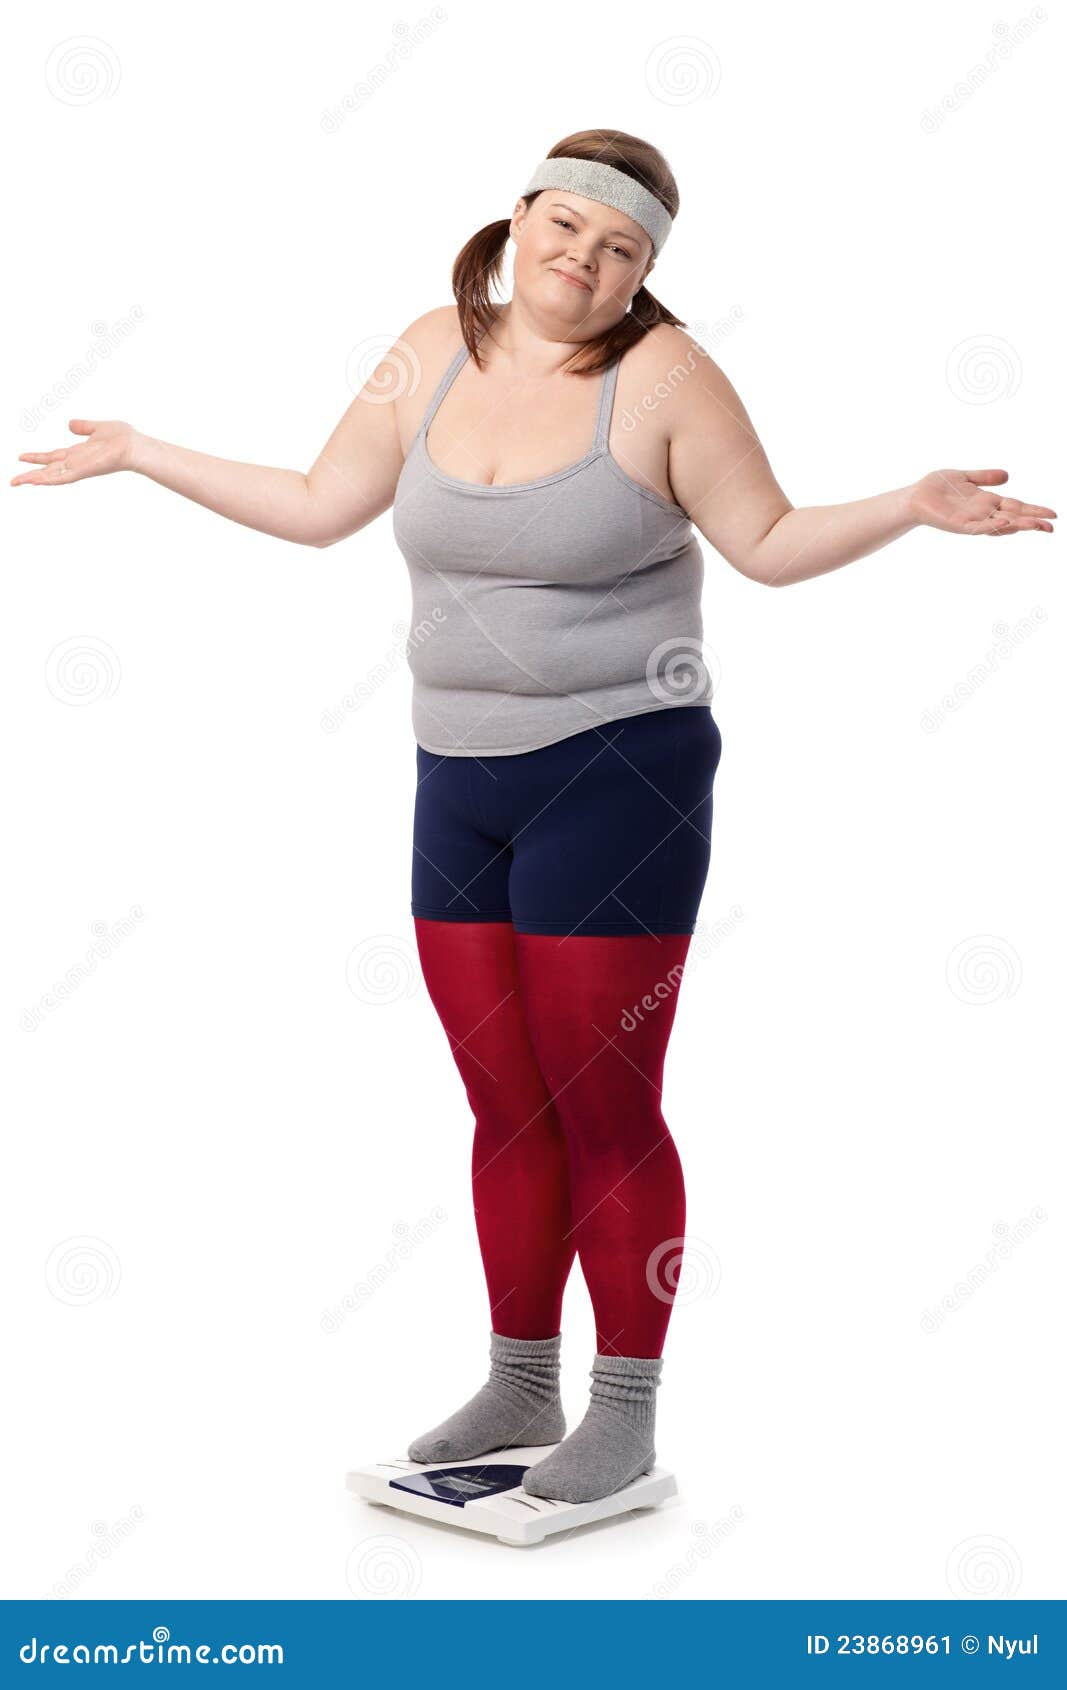 https://thumbs.dreamstime.com/z/disappointed-fat-woman-scale-arms-opened-23868961.jpg